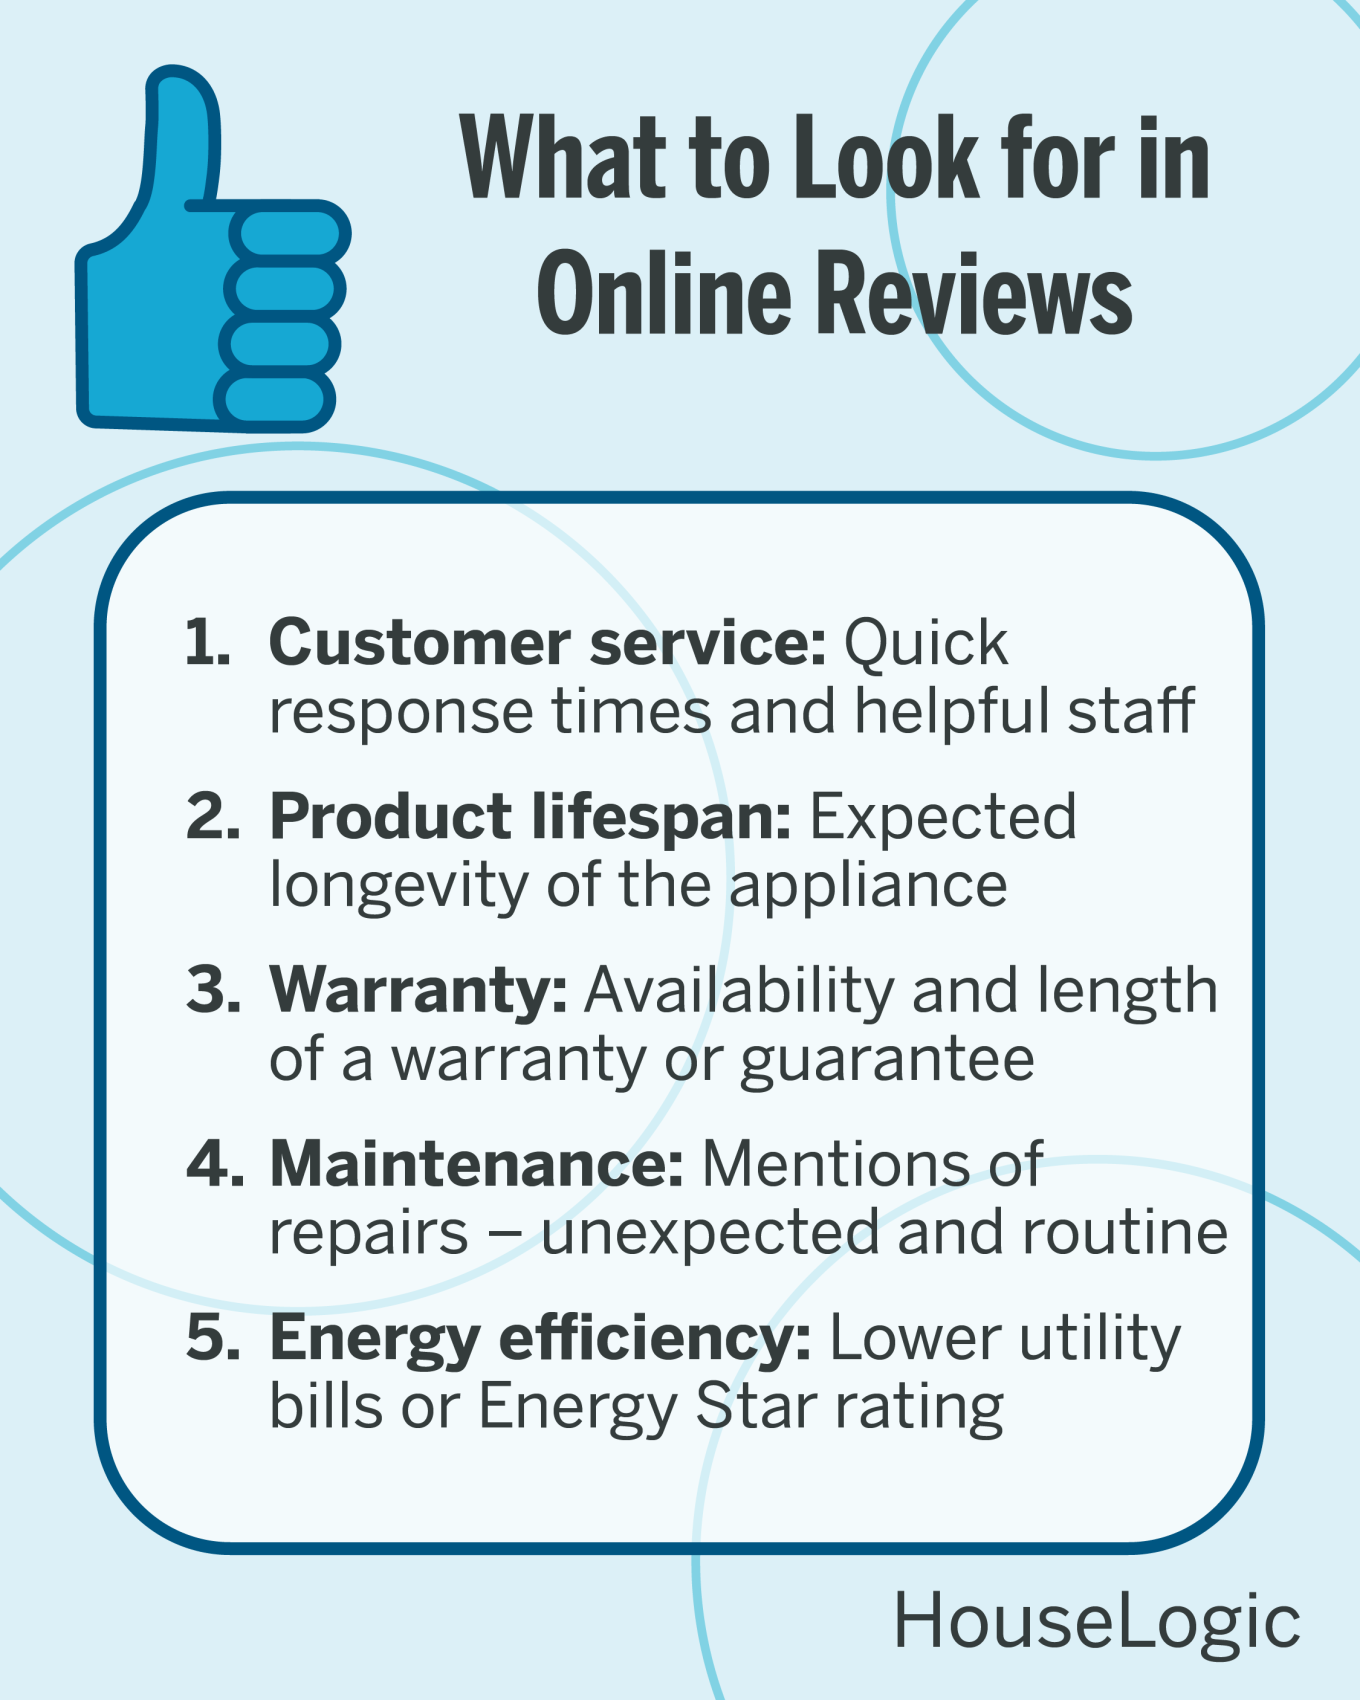 Look for mentions of customer service, product lifespan, warranty information, maintenance information, and energy efficiency when looking at online reviews.